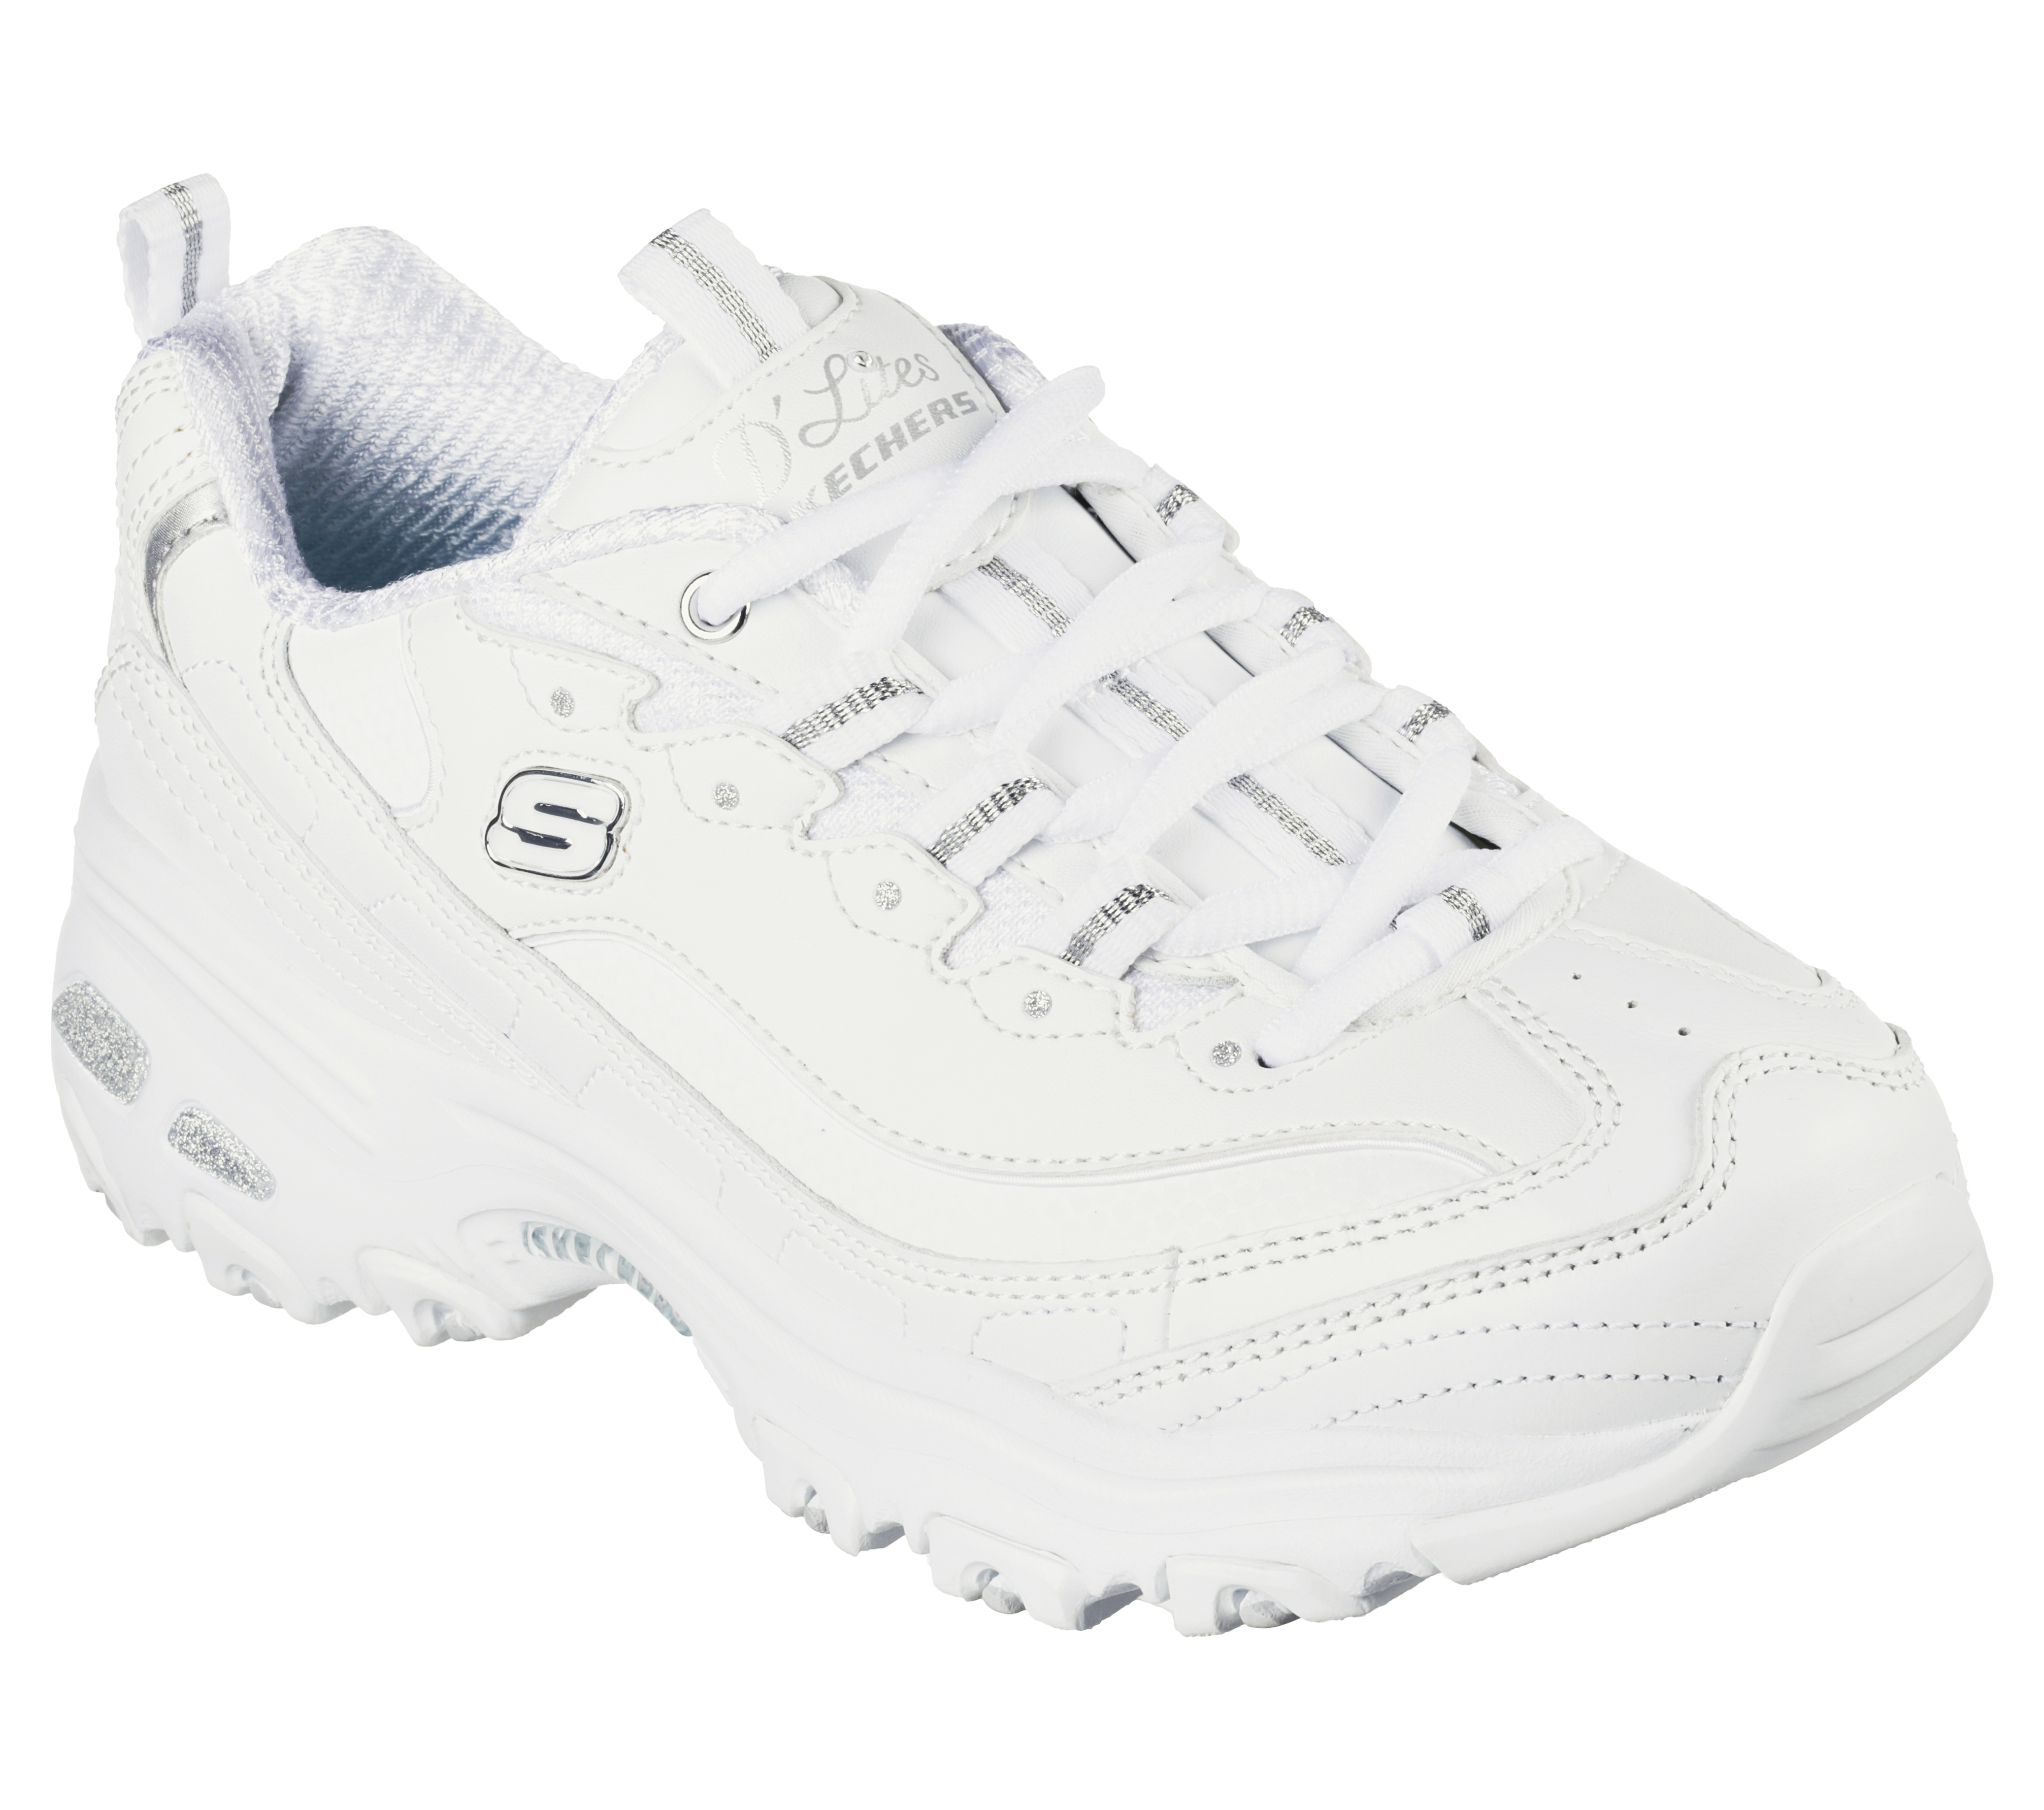 skechers all white shoes Off 64 